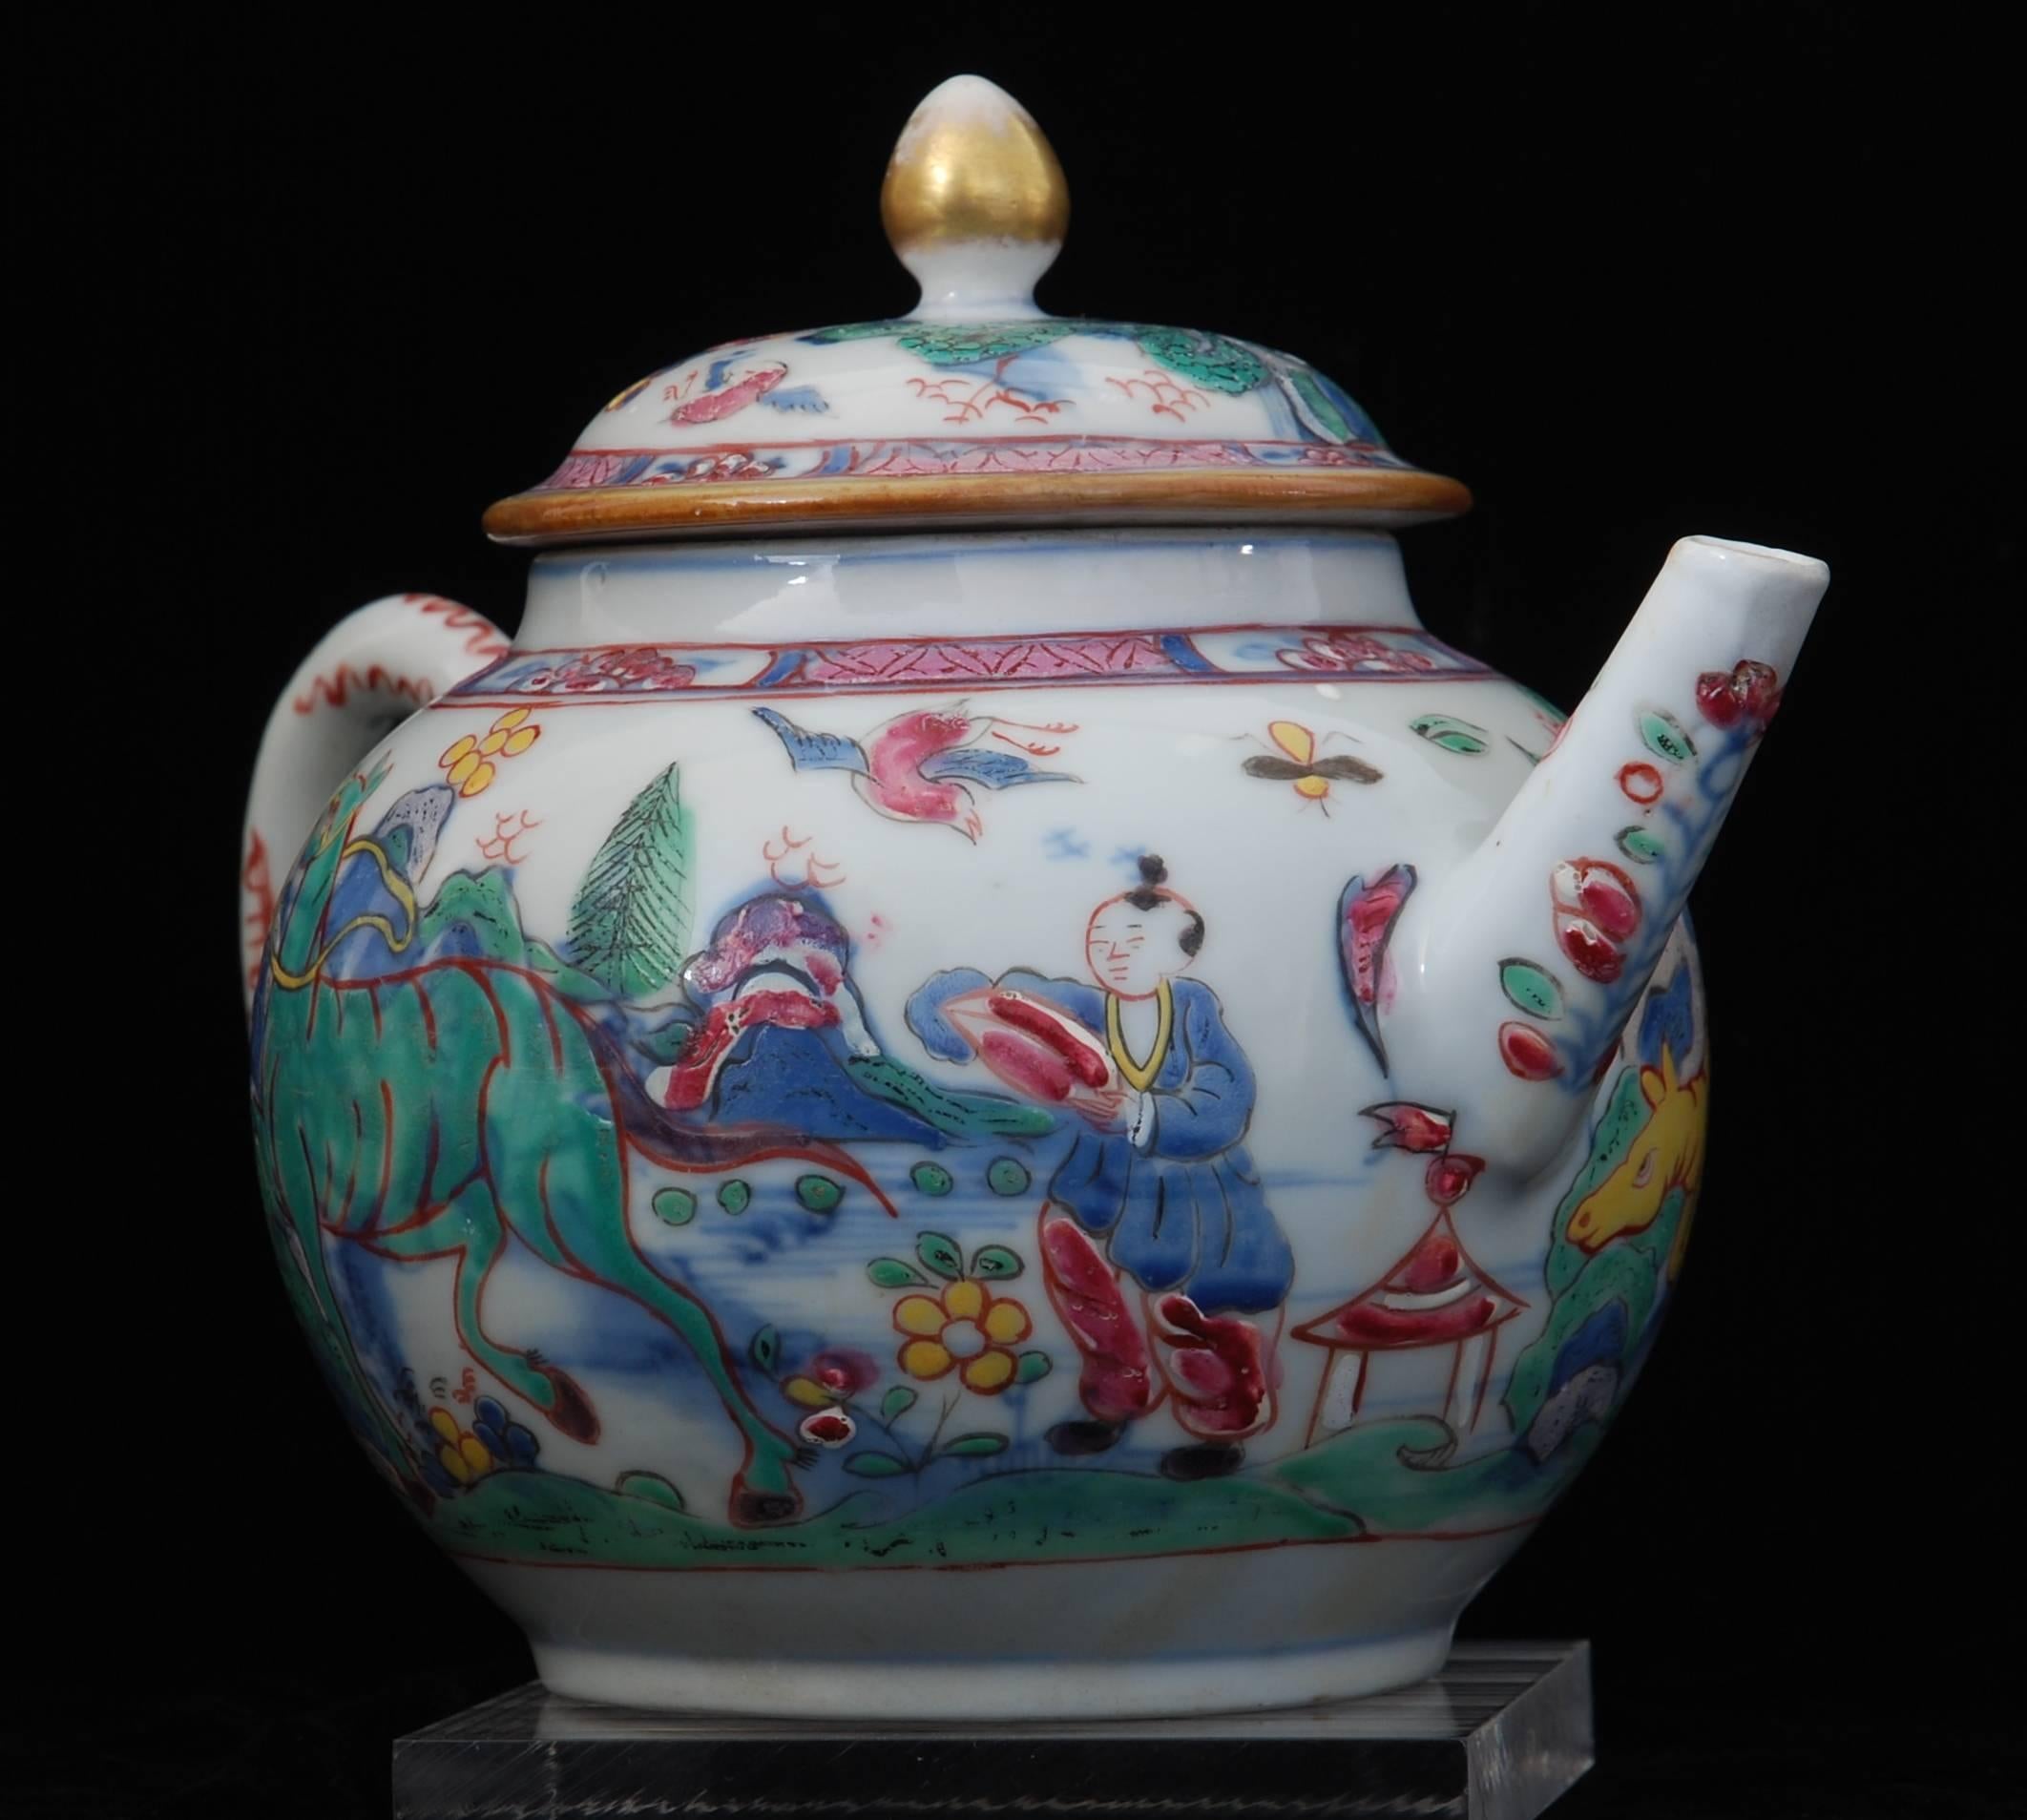 18th Century Teapot, Prancing Ponies, China, circa 1760, Decorated in London